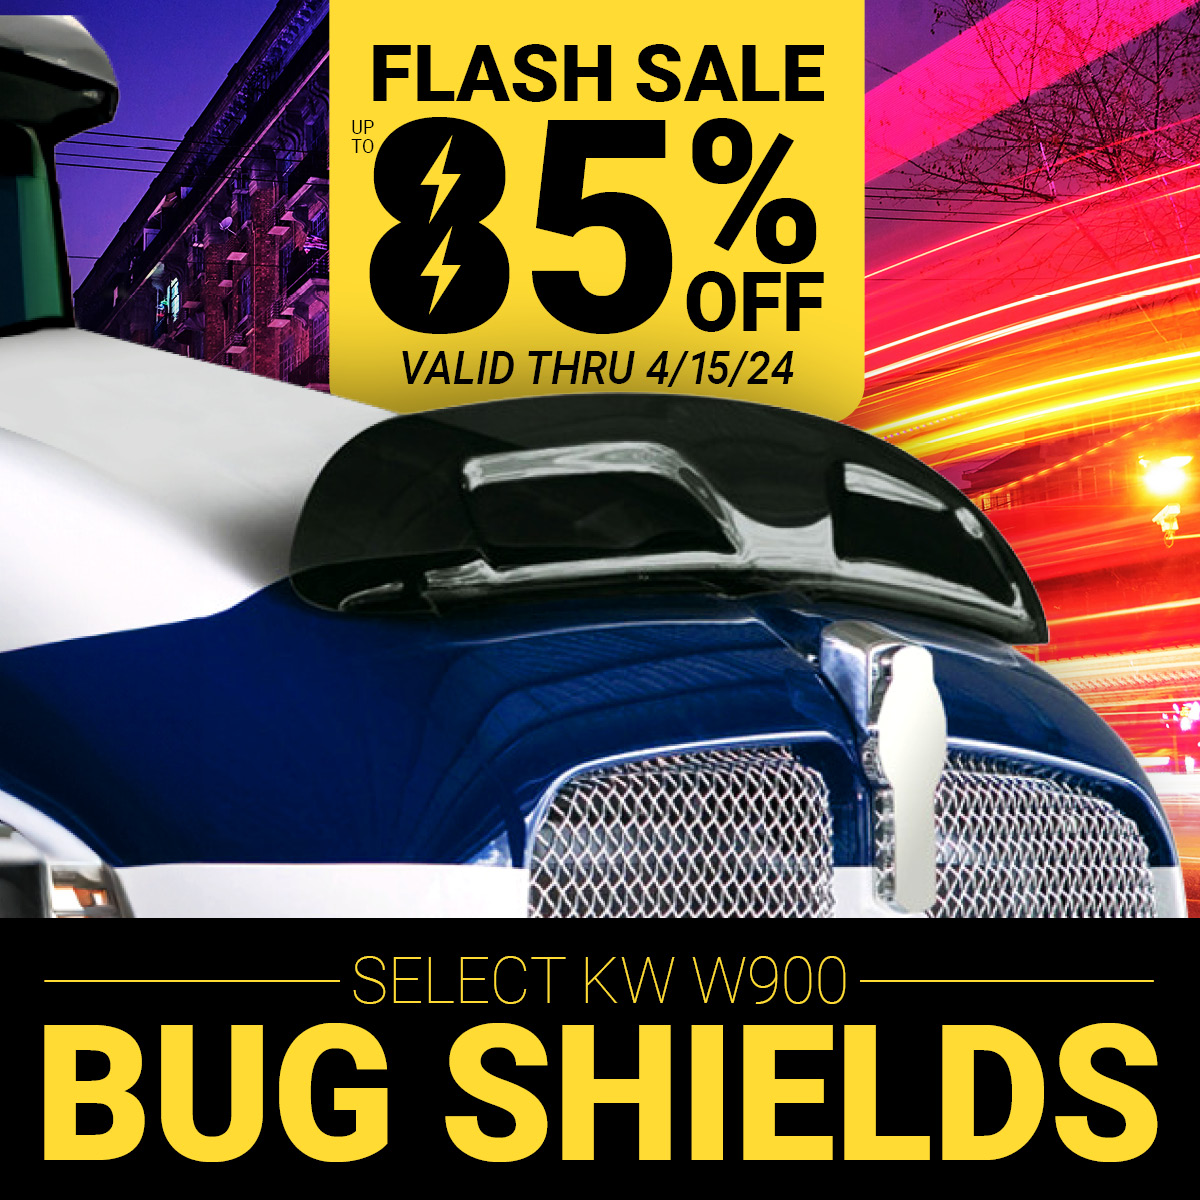 The bugs are back out.... 🦟🪰
Keep your truck clean with a select Kenworth W900 EGR Bug Shield! 
Hurry while they're up to 85% OFF:
4statetrucks.com/search/?search…
Ends 4/15 11:59 p.m. cst. 

#4StateTrucks #ChromeShopMafia #chromeshop #trucking #bigrig #truckers #diesel #bugshield